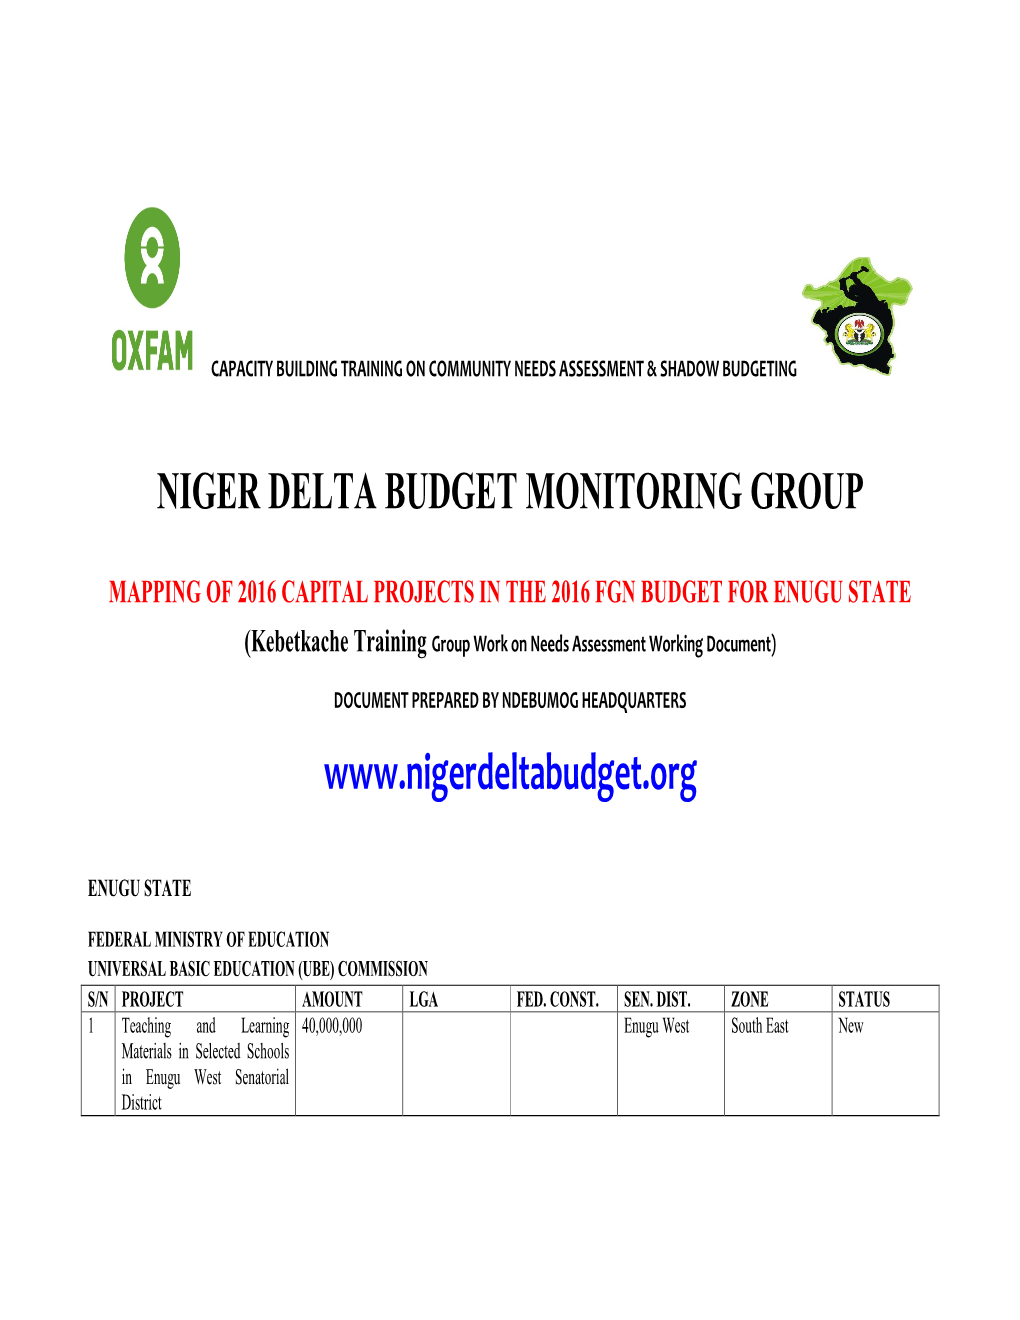 Niger Delta Budget Monitoring Group Mapping